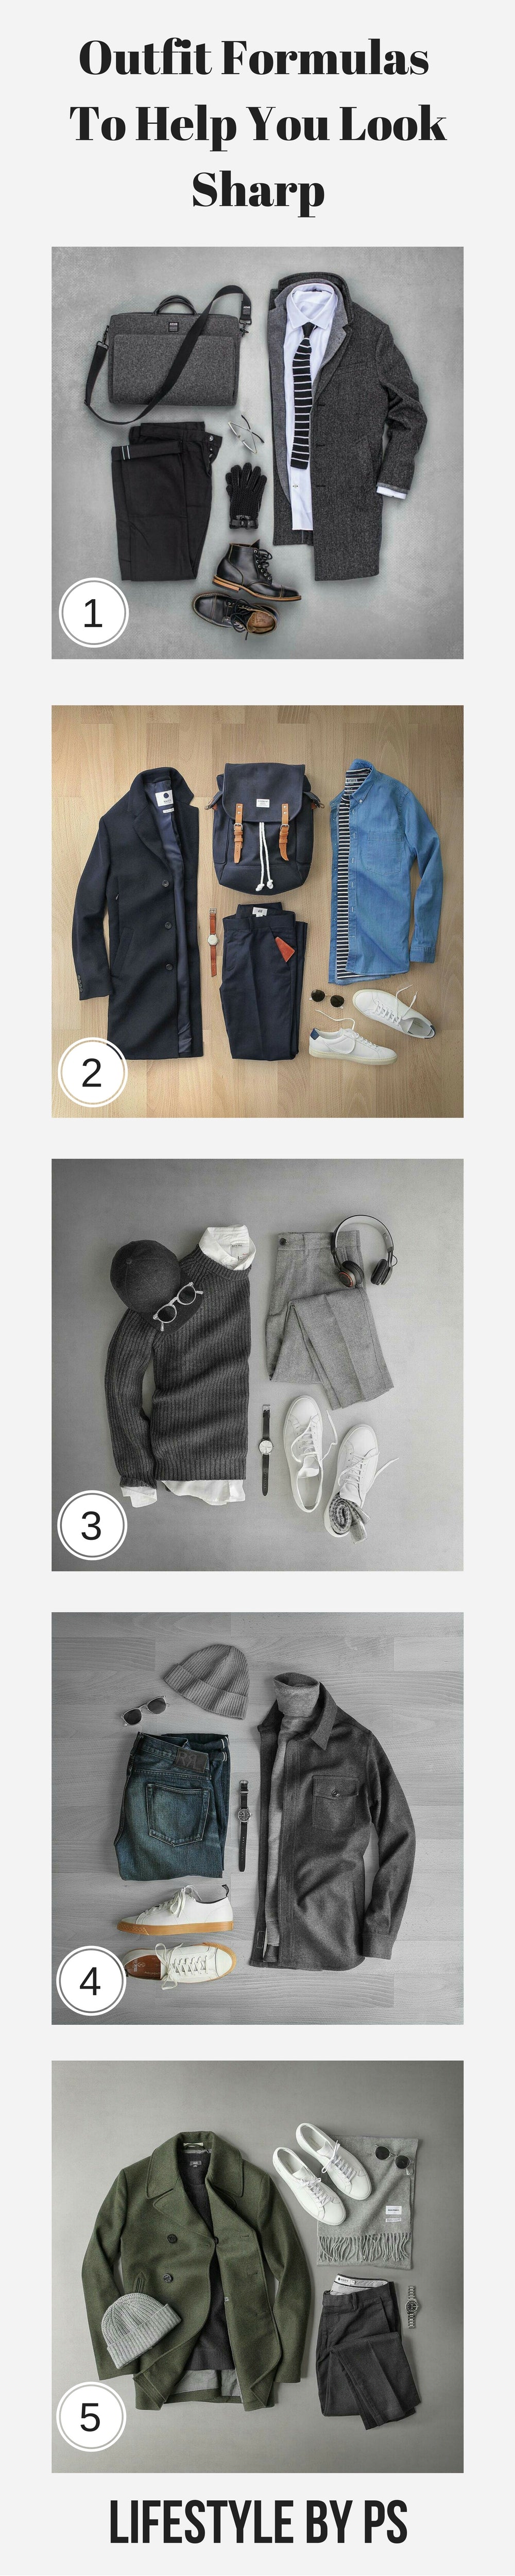 OUTFIT GRIDS FOR MEN